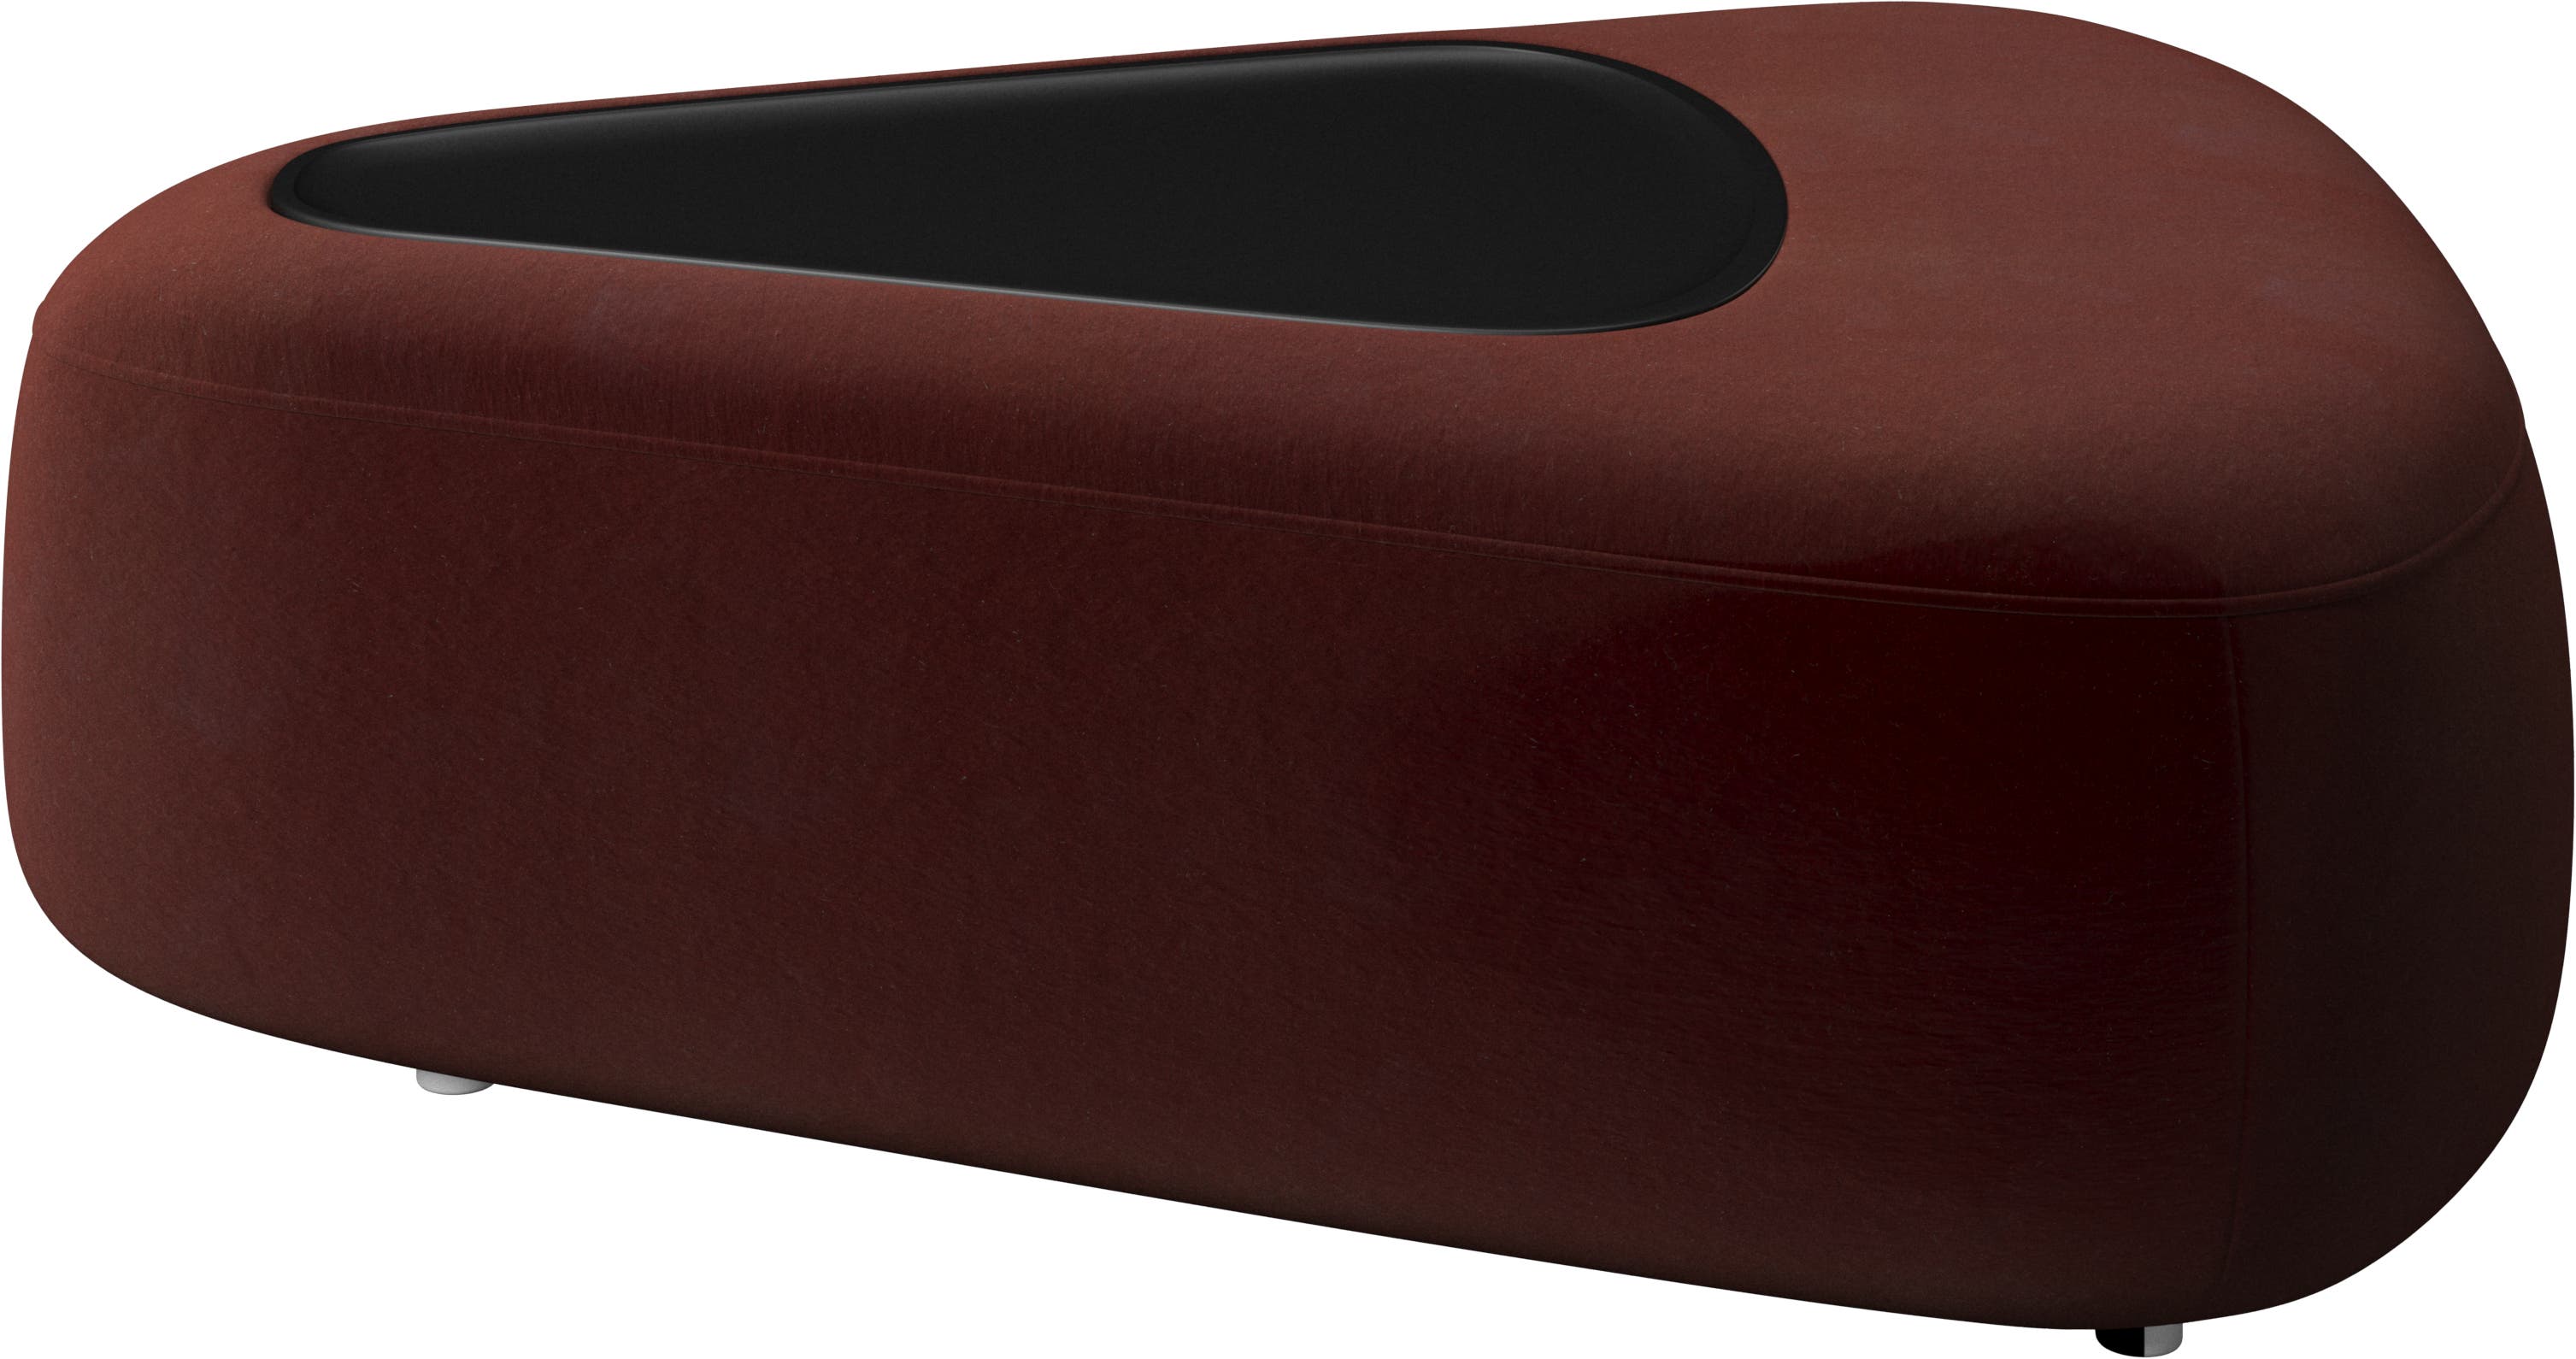 Ottawa triangular pouf with tray and USB charger